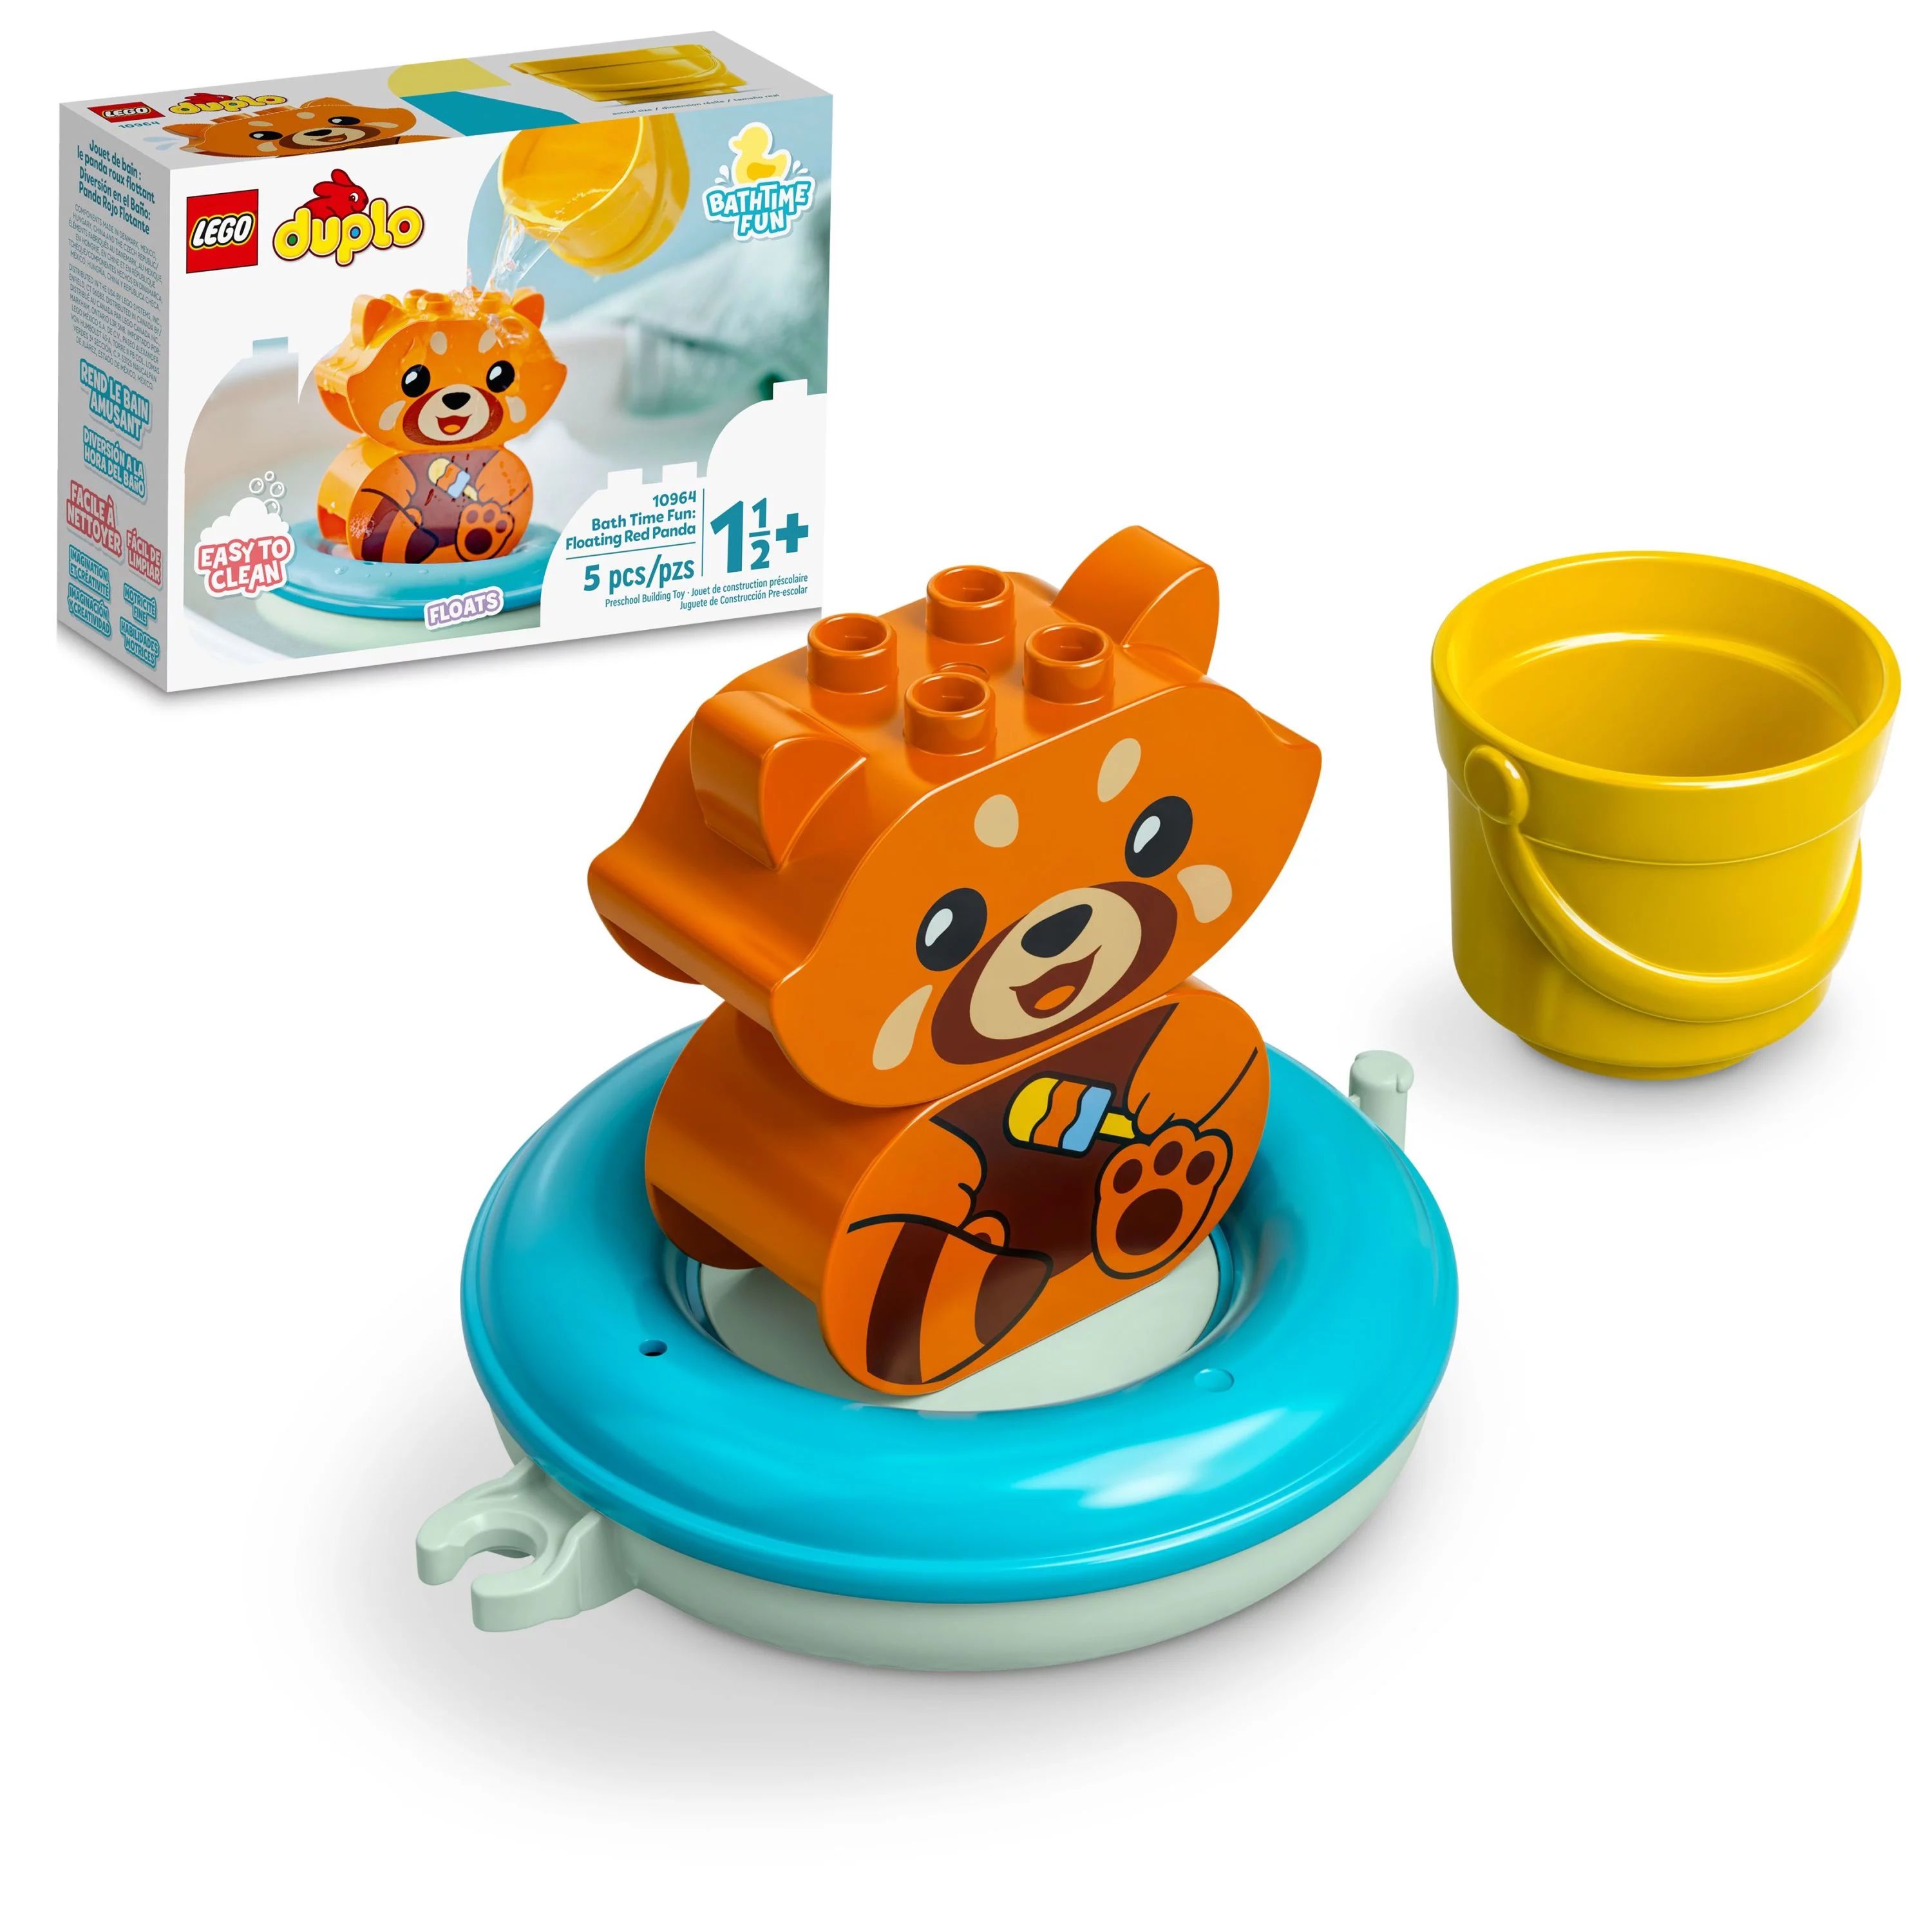 LEGO DUPLO Bath Time Fun: Floating Red Panda 10964 Bath Toy for Babies and Toddlers Ages 1.5 Plus... | Walmart (US)